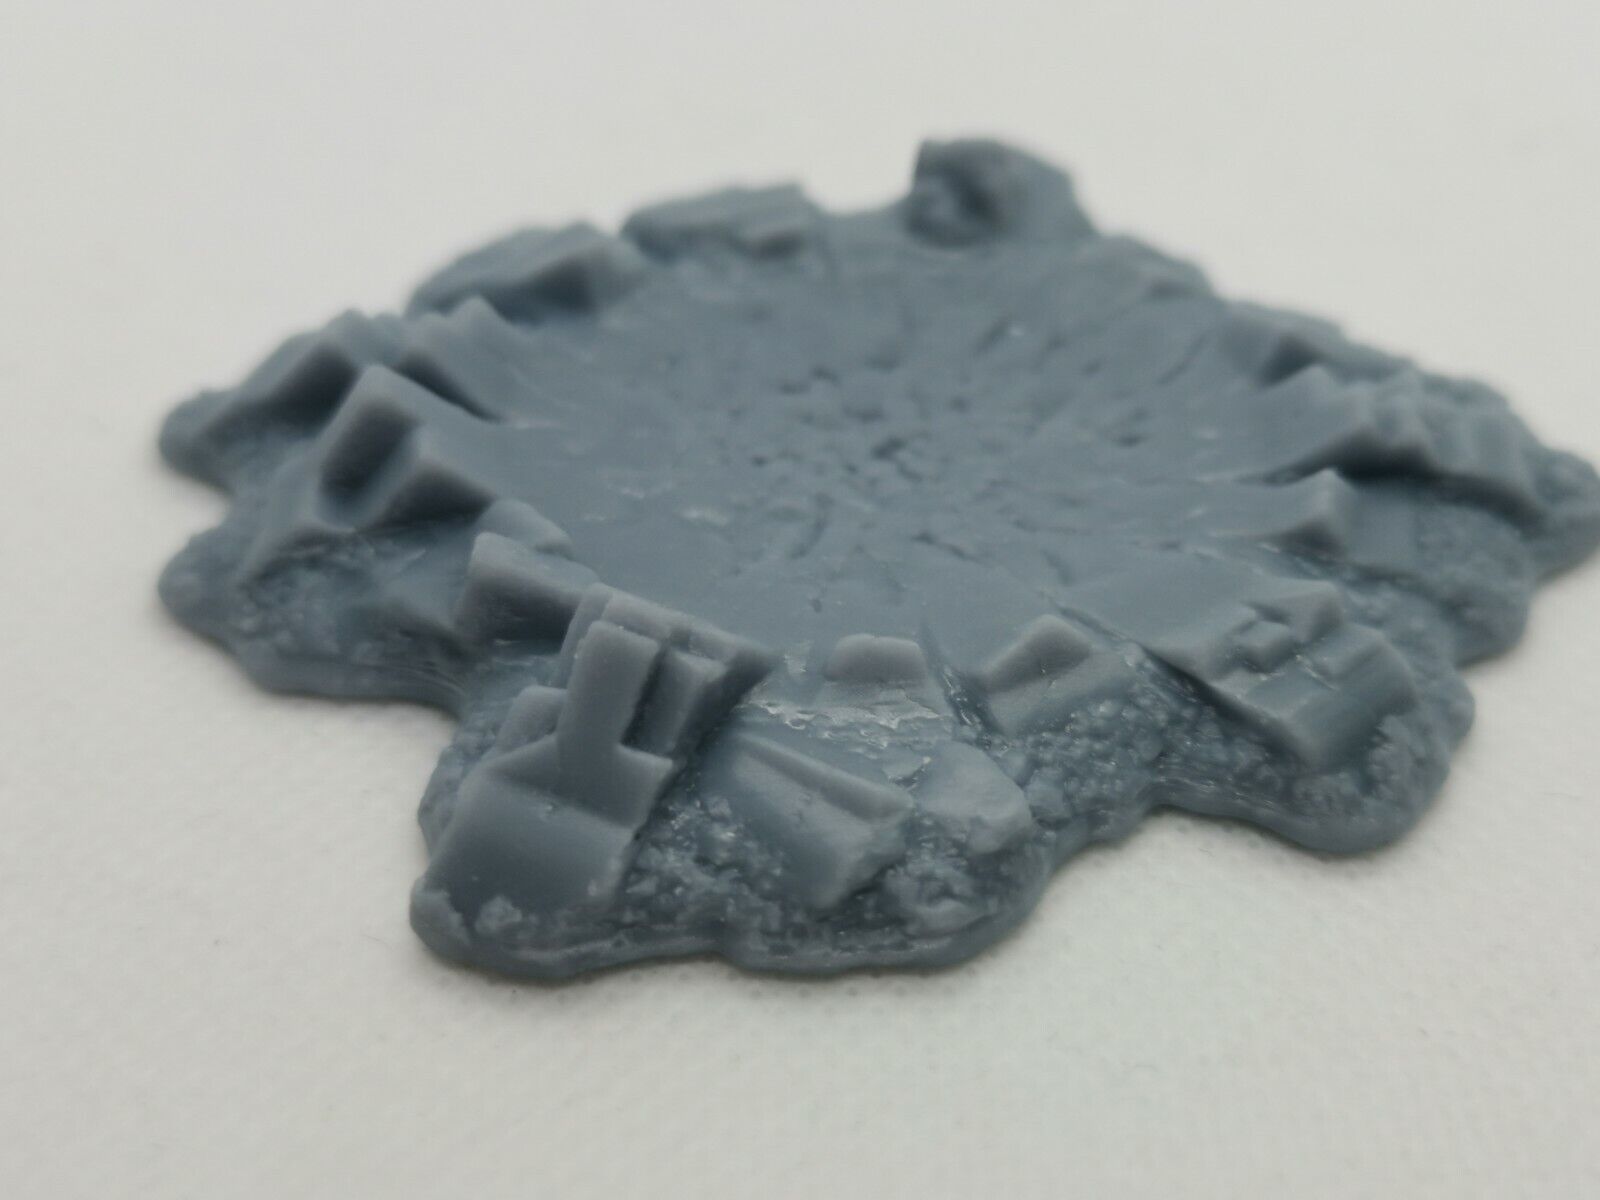 Small blast crater terrain scenery tabletop Miniatures games (x3)